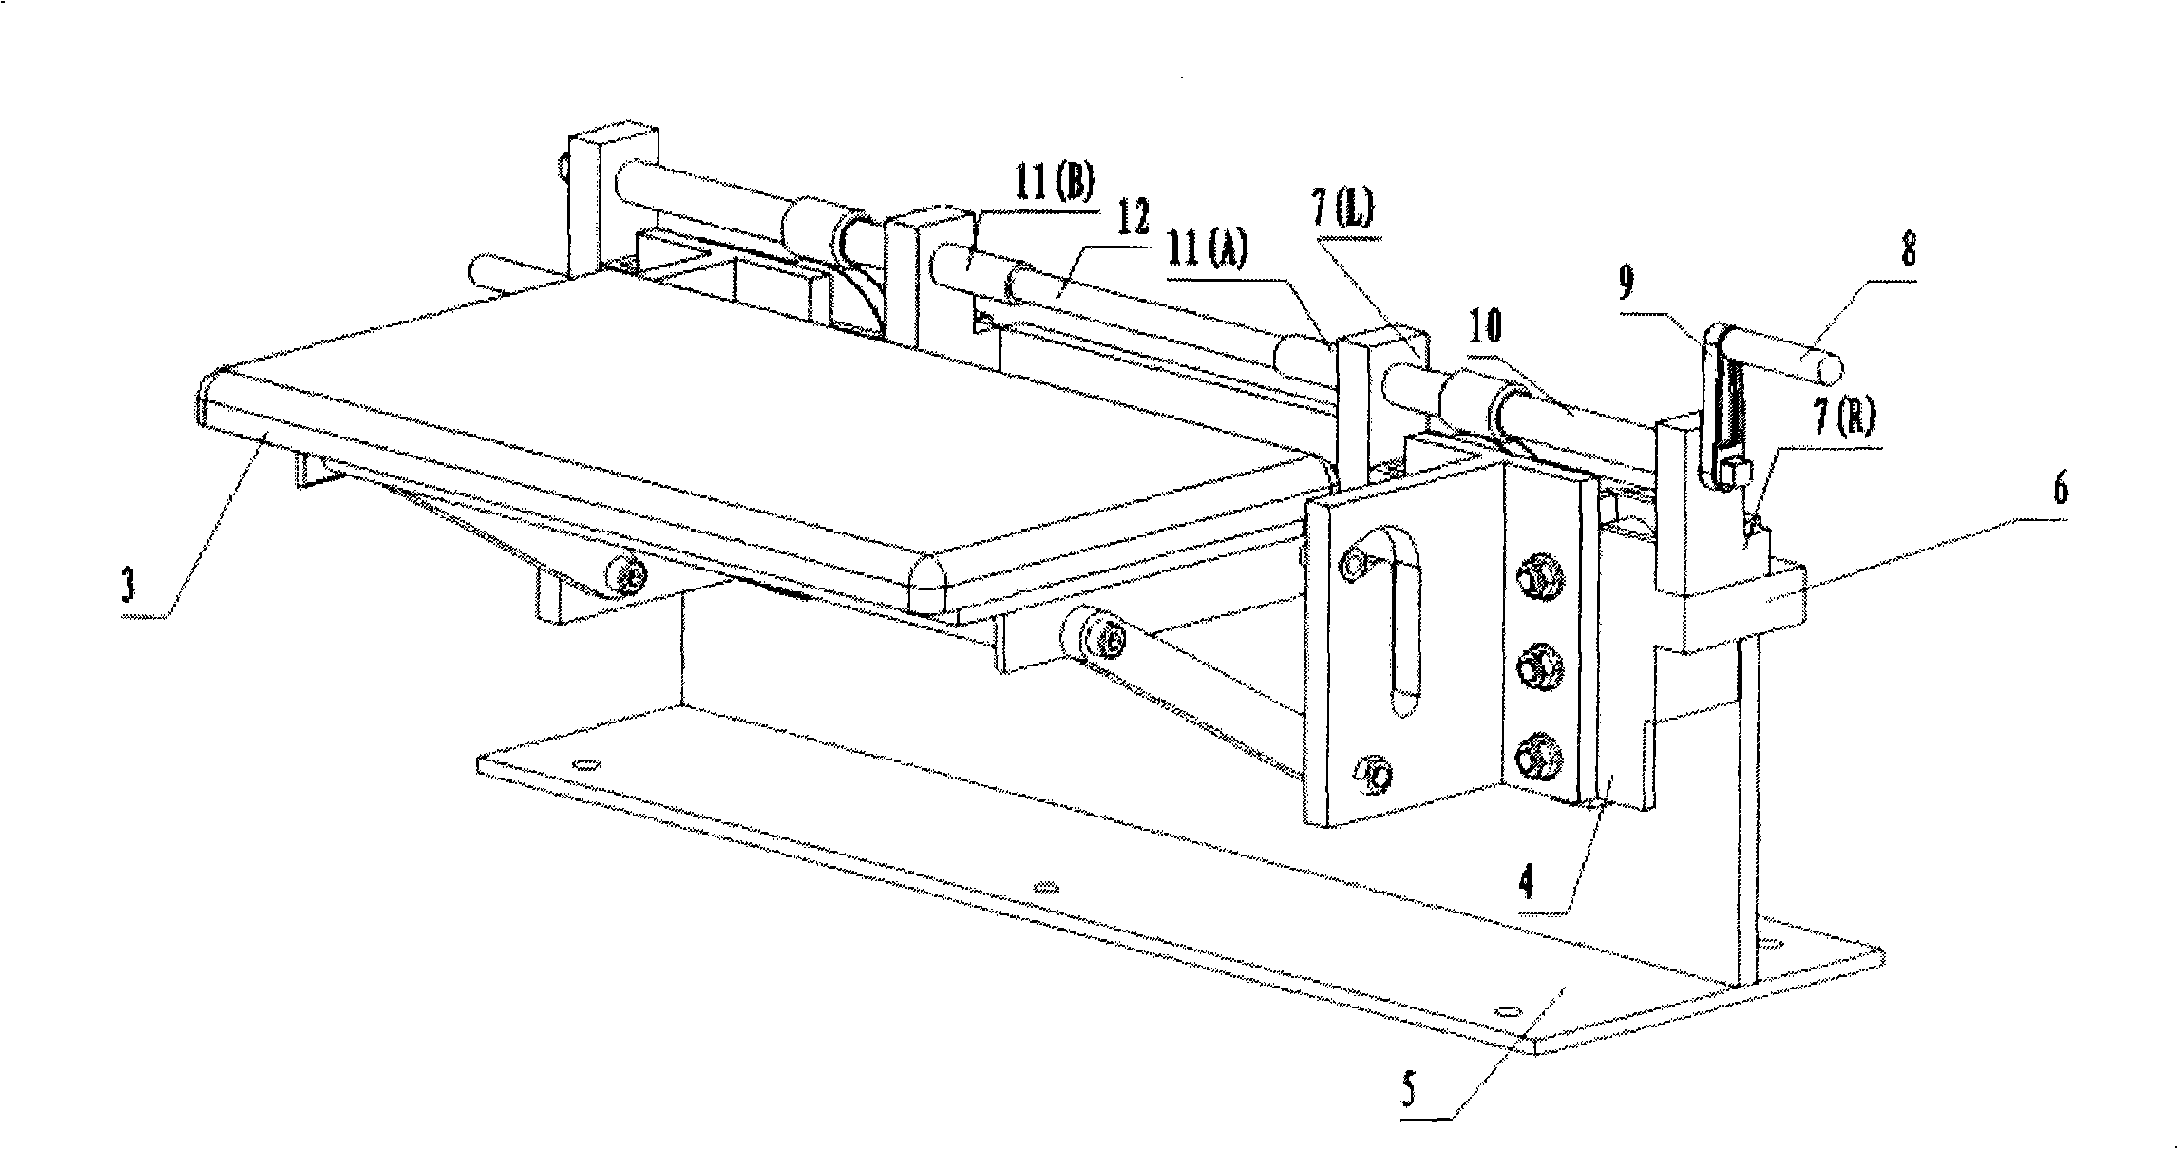 Auxiliary apparatus for getting on/down car driven by the physical disabilities